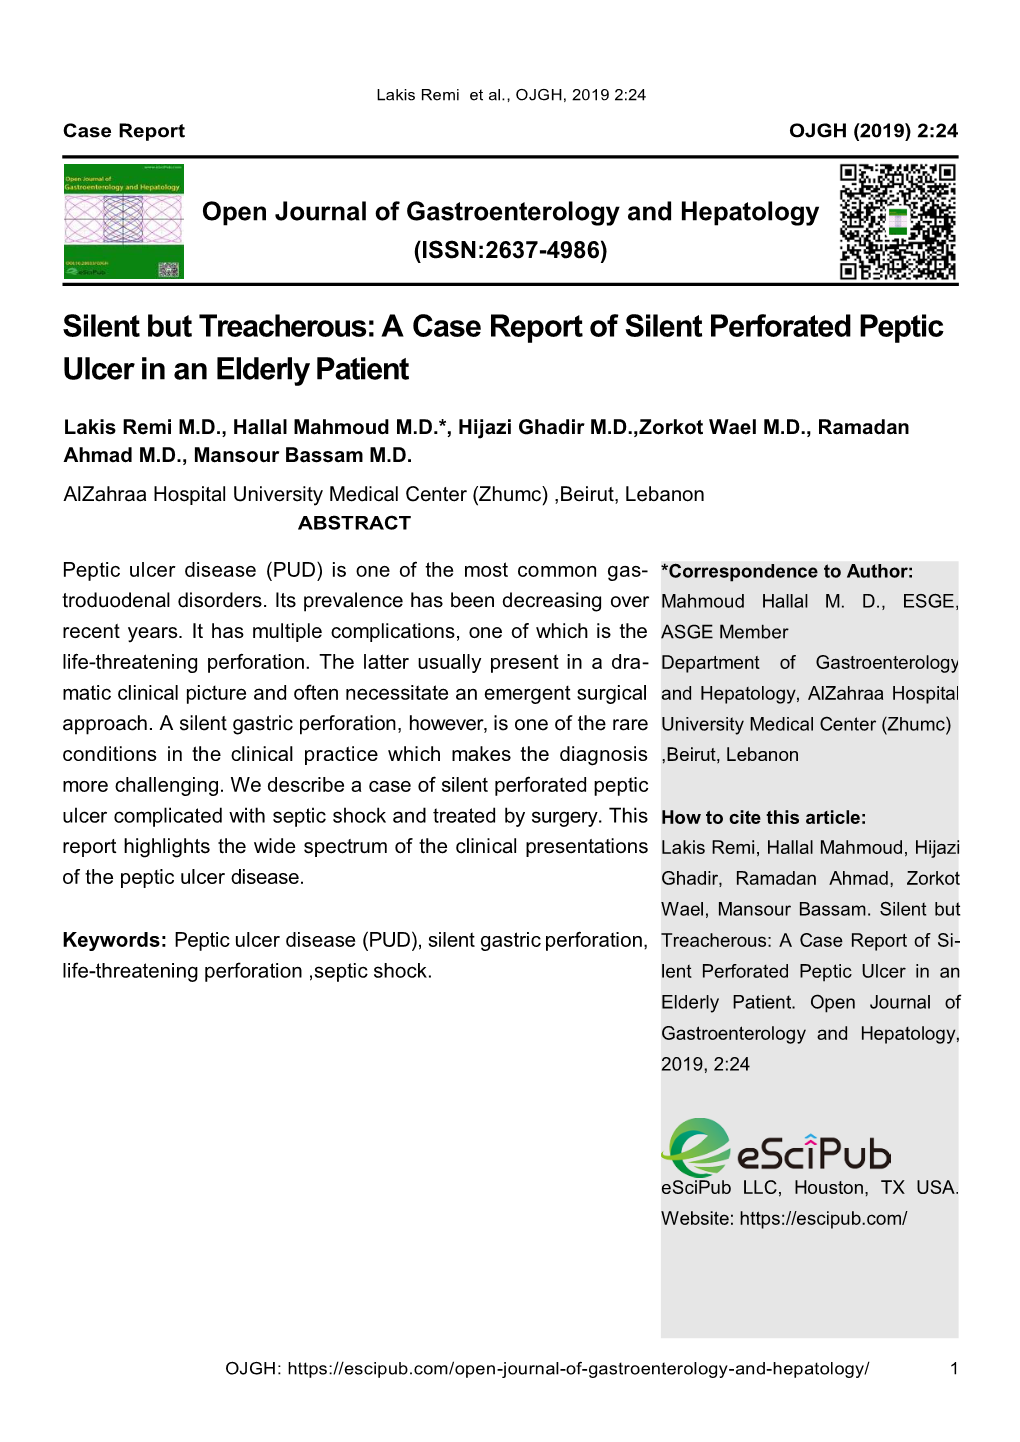 A Case Report of Silent Perforated Peptic Ulcer in an Elderly Patient